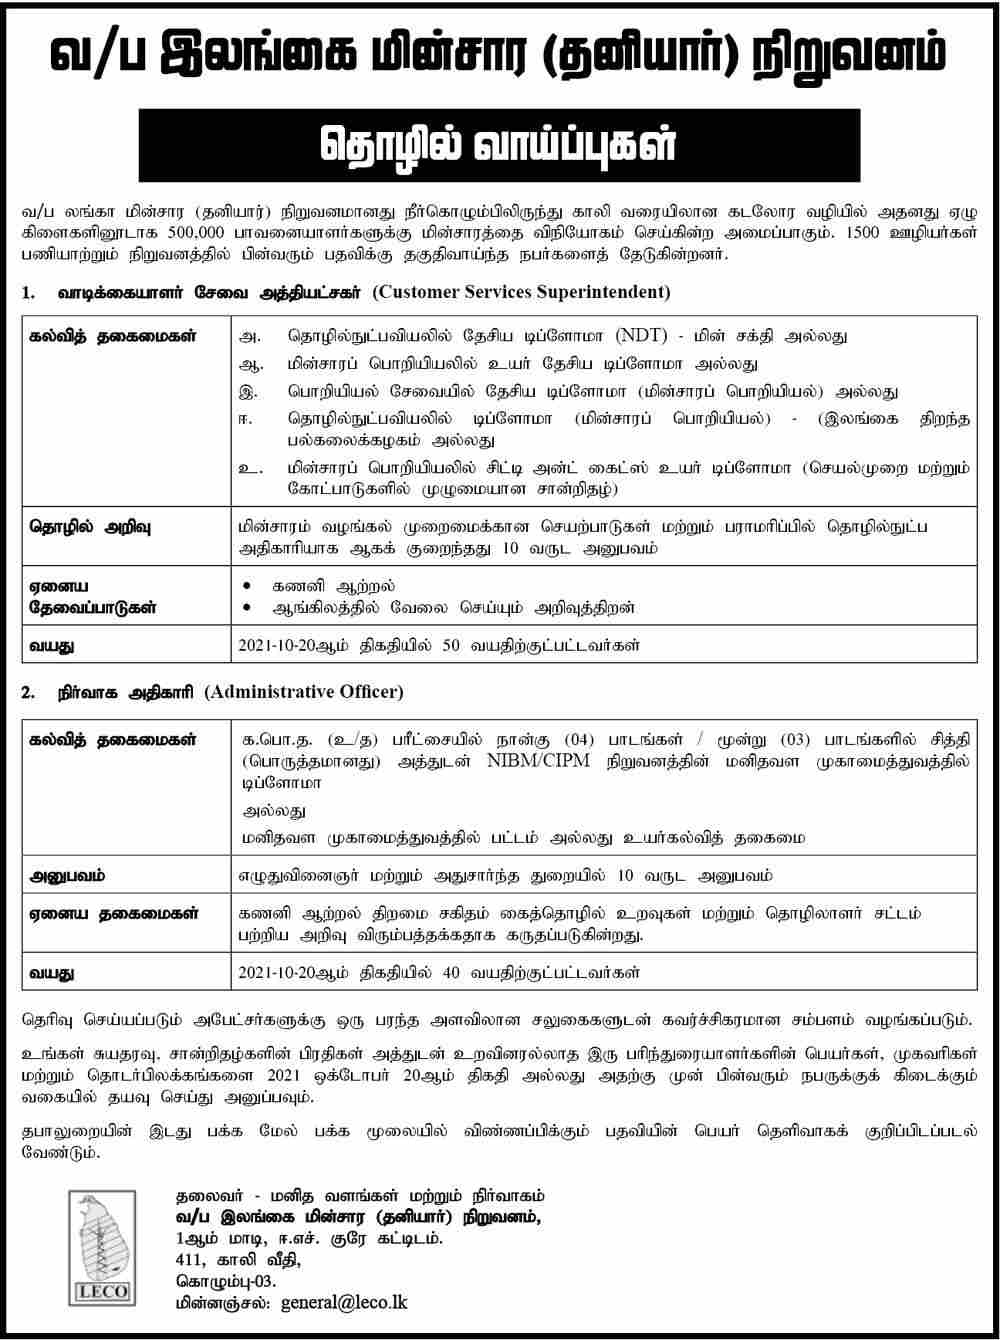 Customer Service Superintendent, Administrative Officer Lanka Electricity Company Tamil